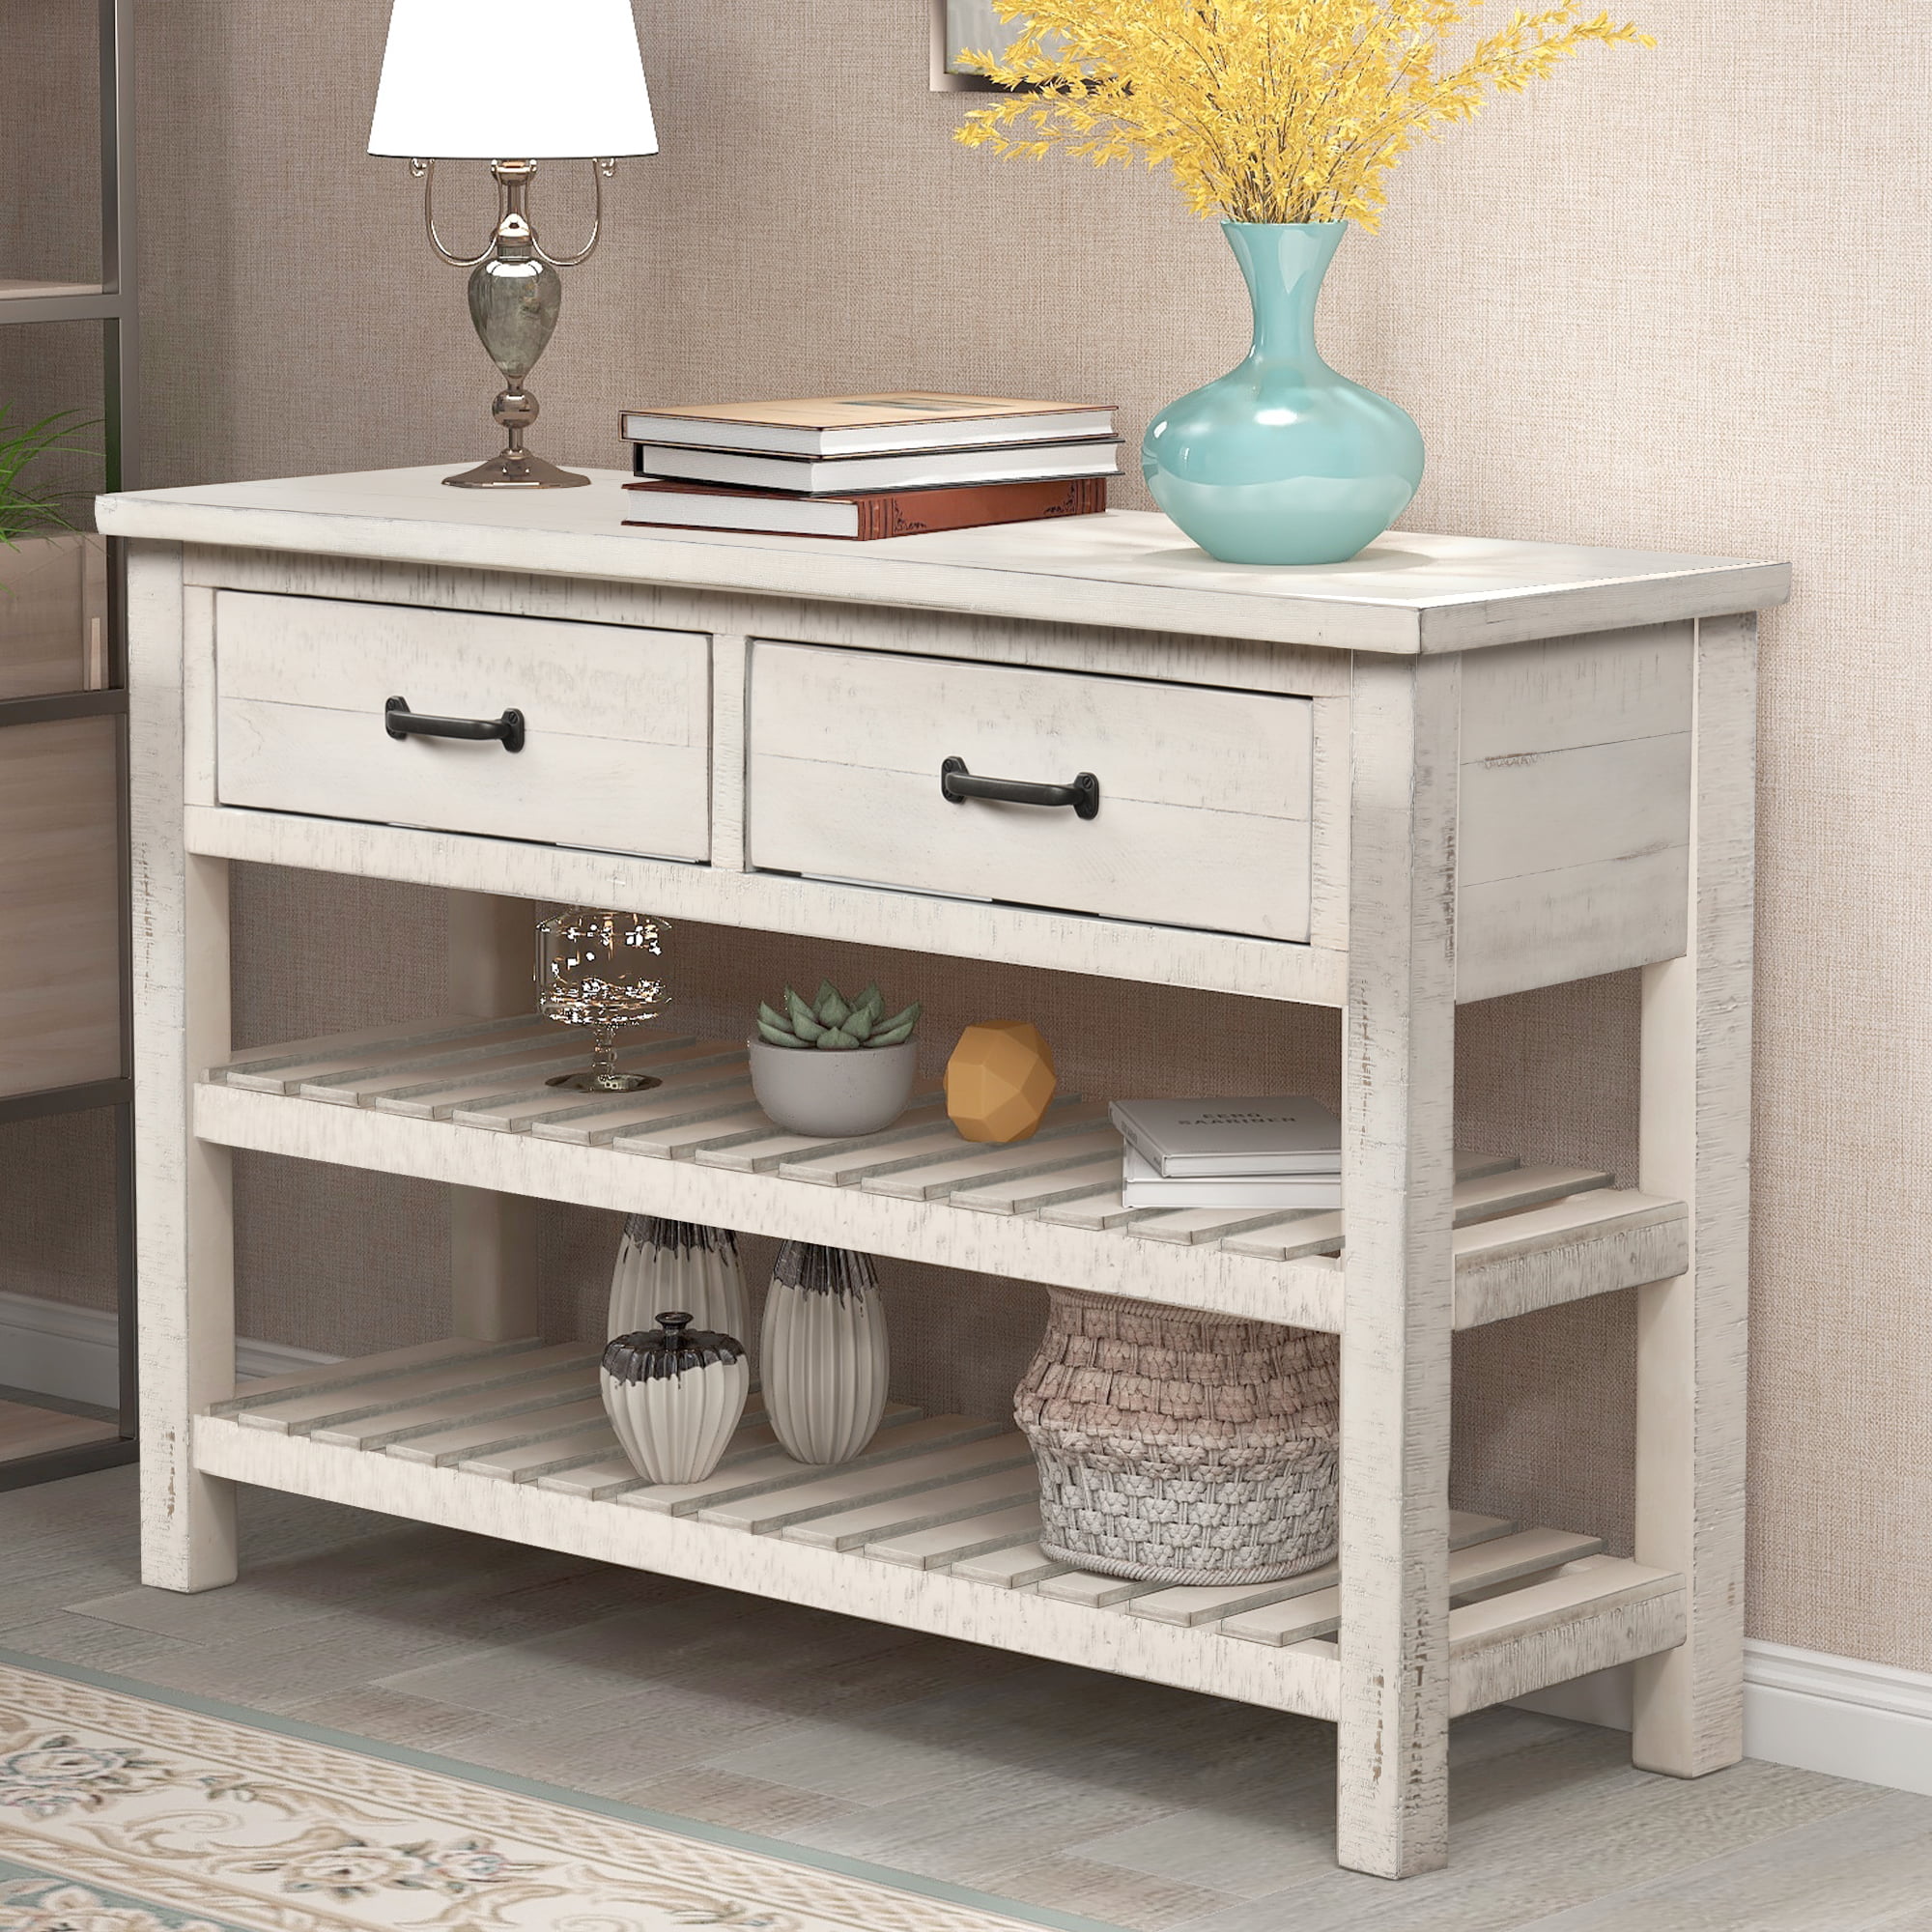 Buffet Sideboard Console Table Desk w/ Drawer Bottom Shelf For Entryway Kitchen 